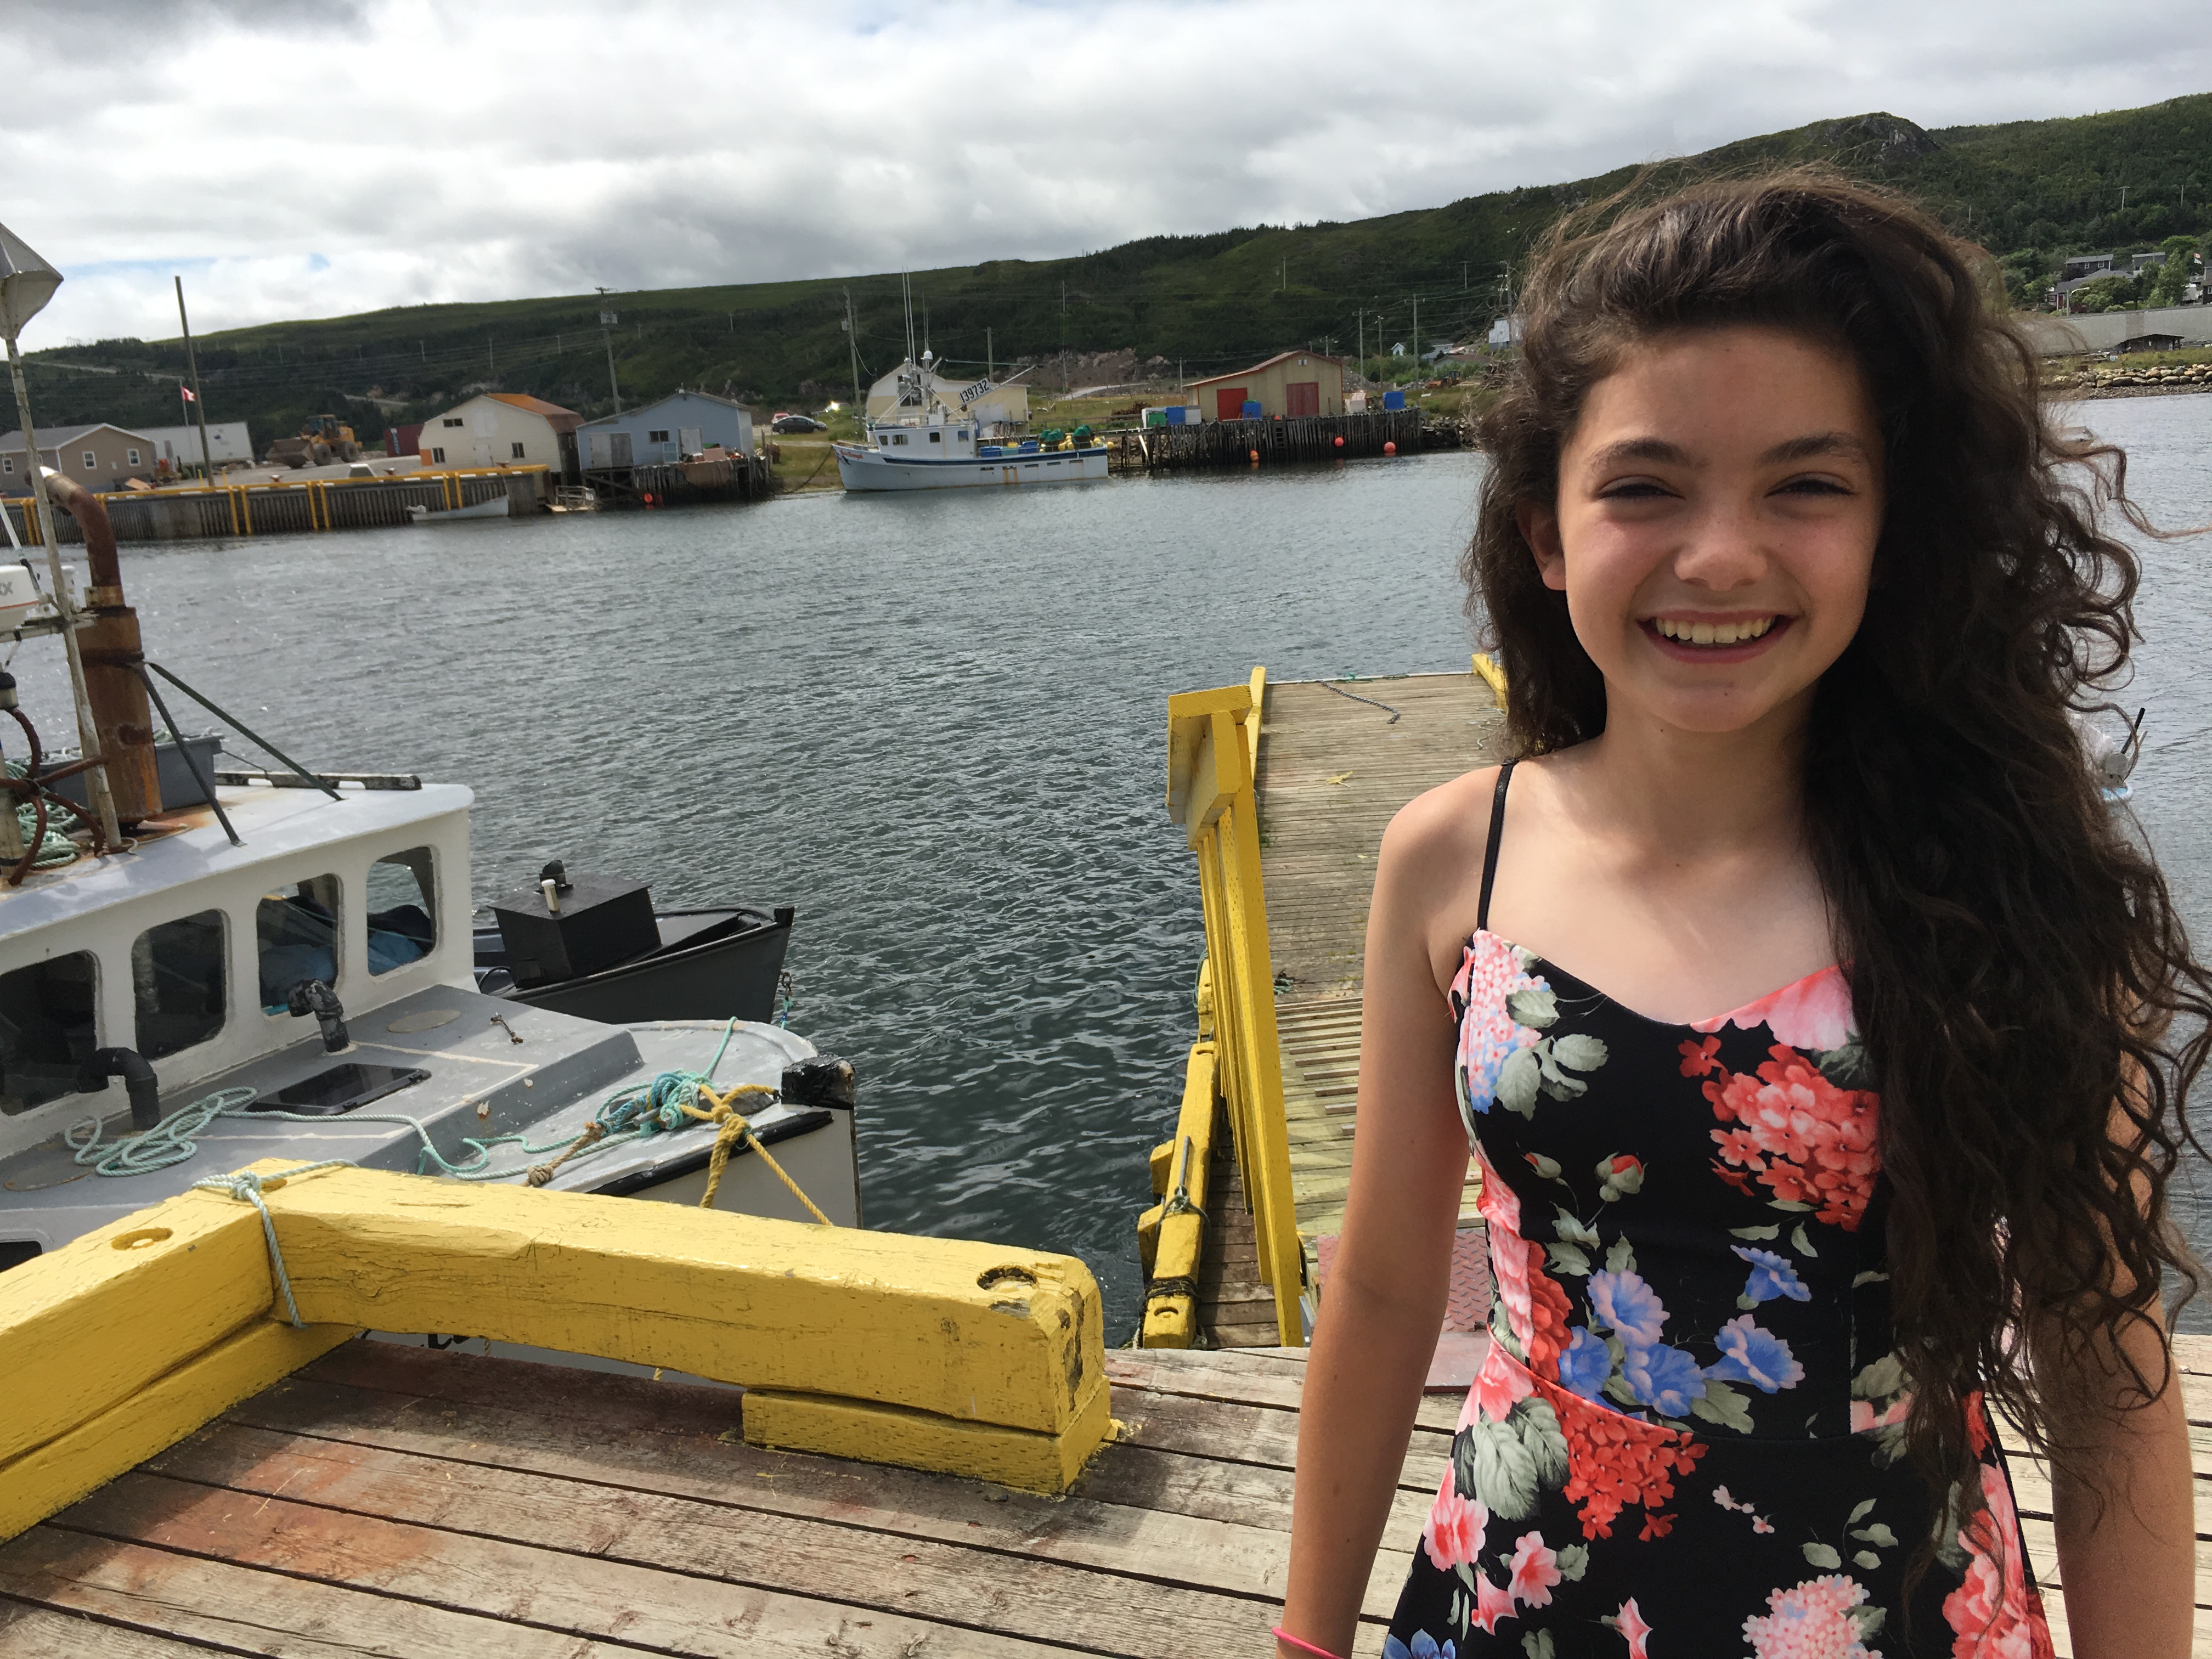 Family fashion on the waterfront in Newfoundland and Labrador